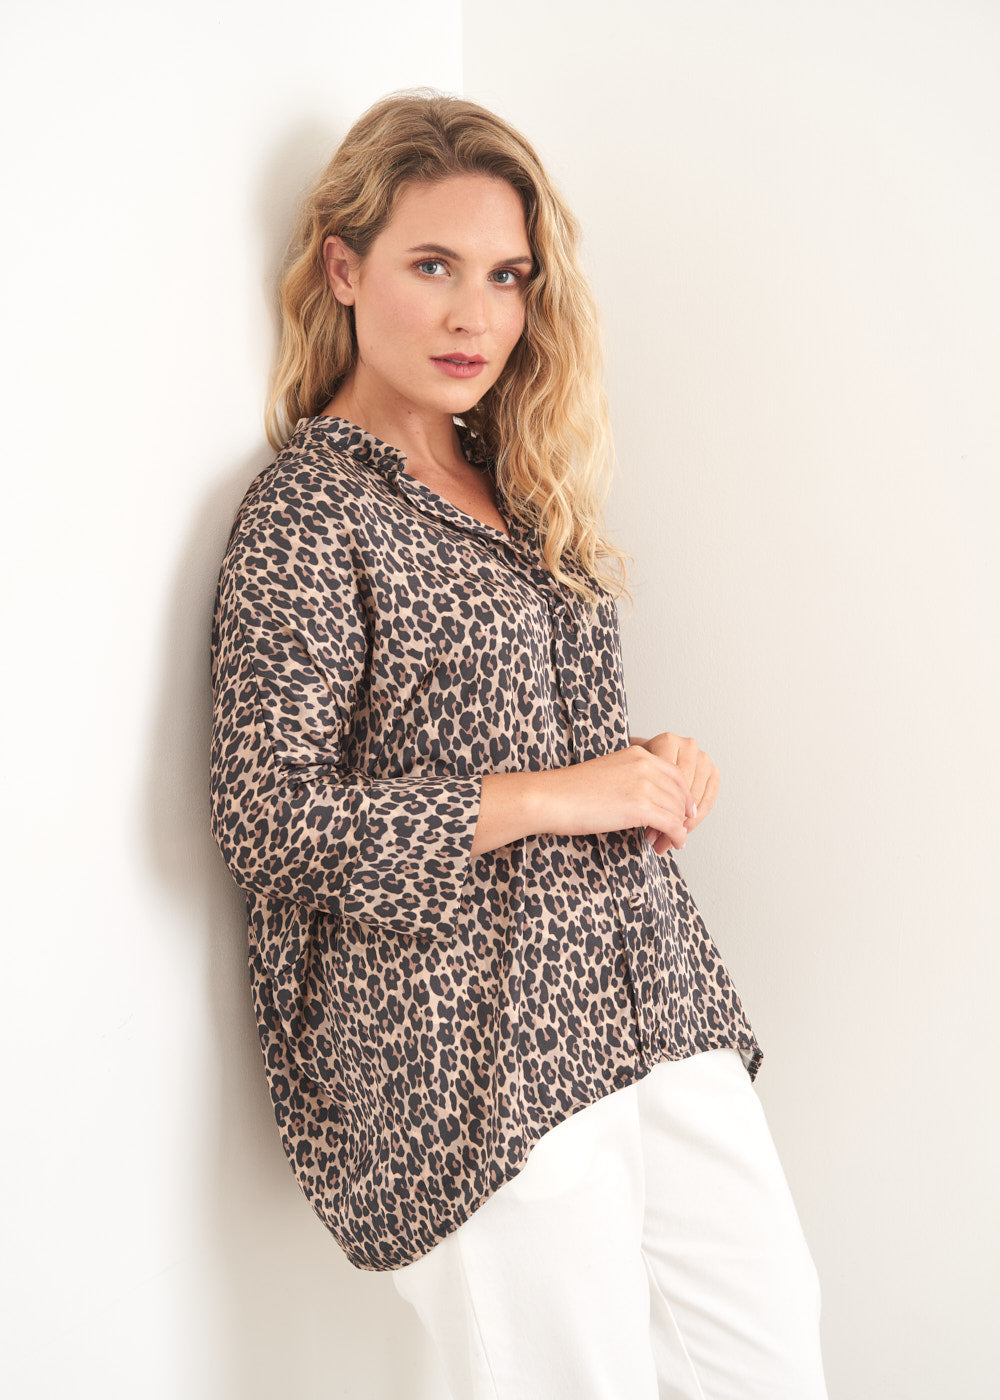 All Clothing | Women's Tops, Dresses & Knitwear | BUSBY & FOX – Page 2